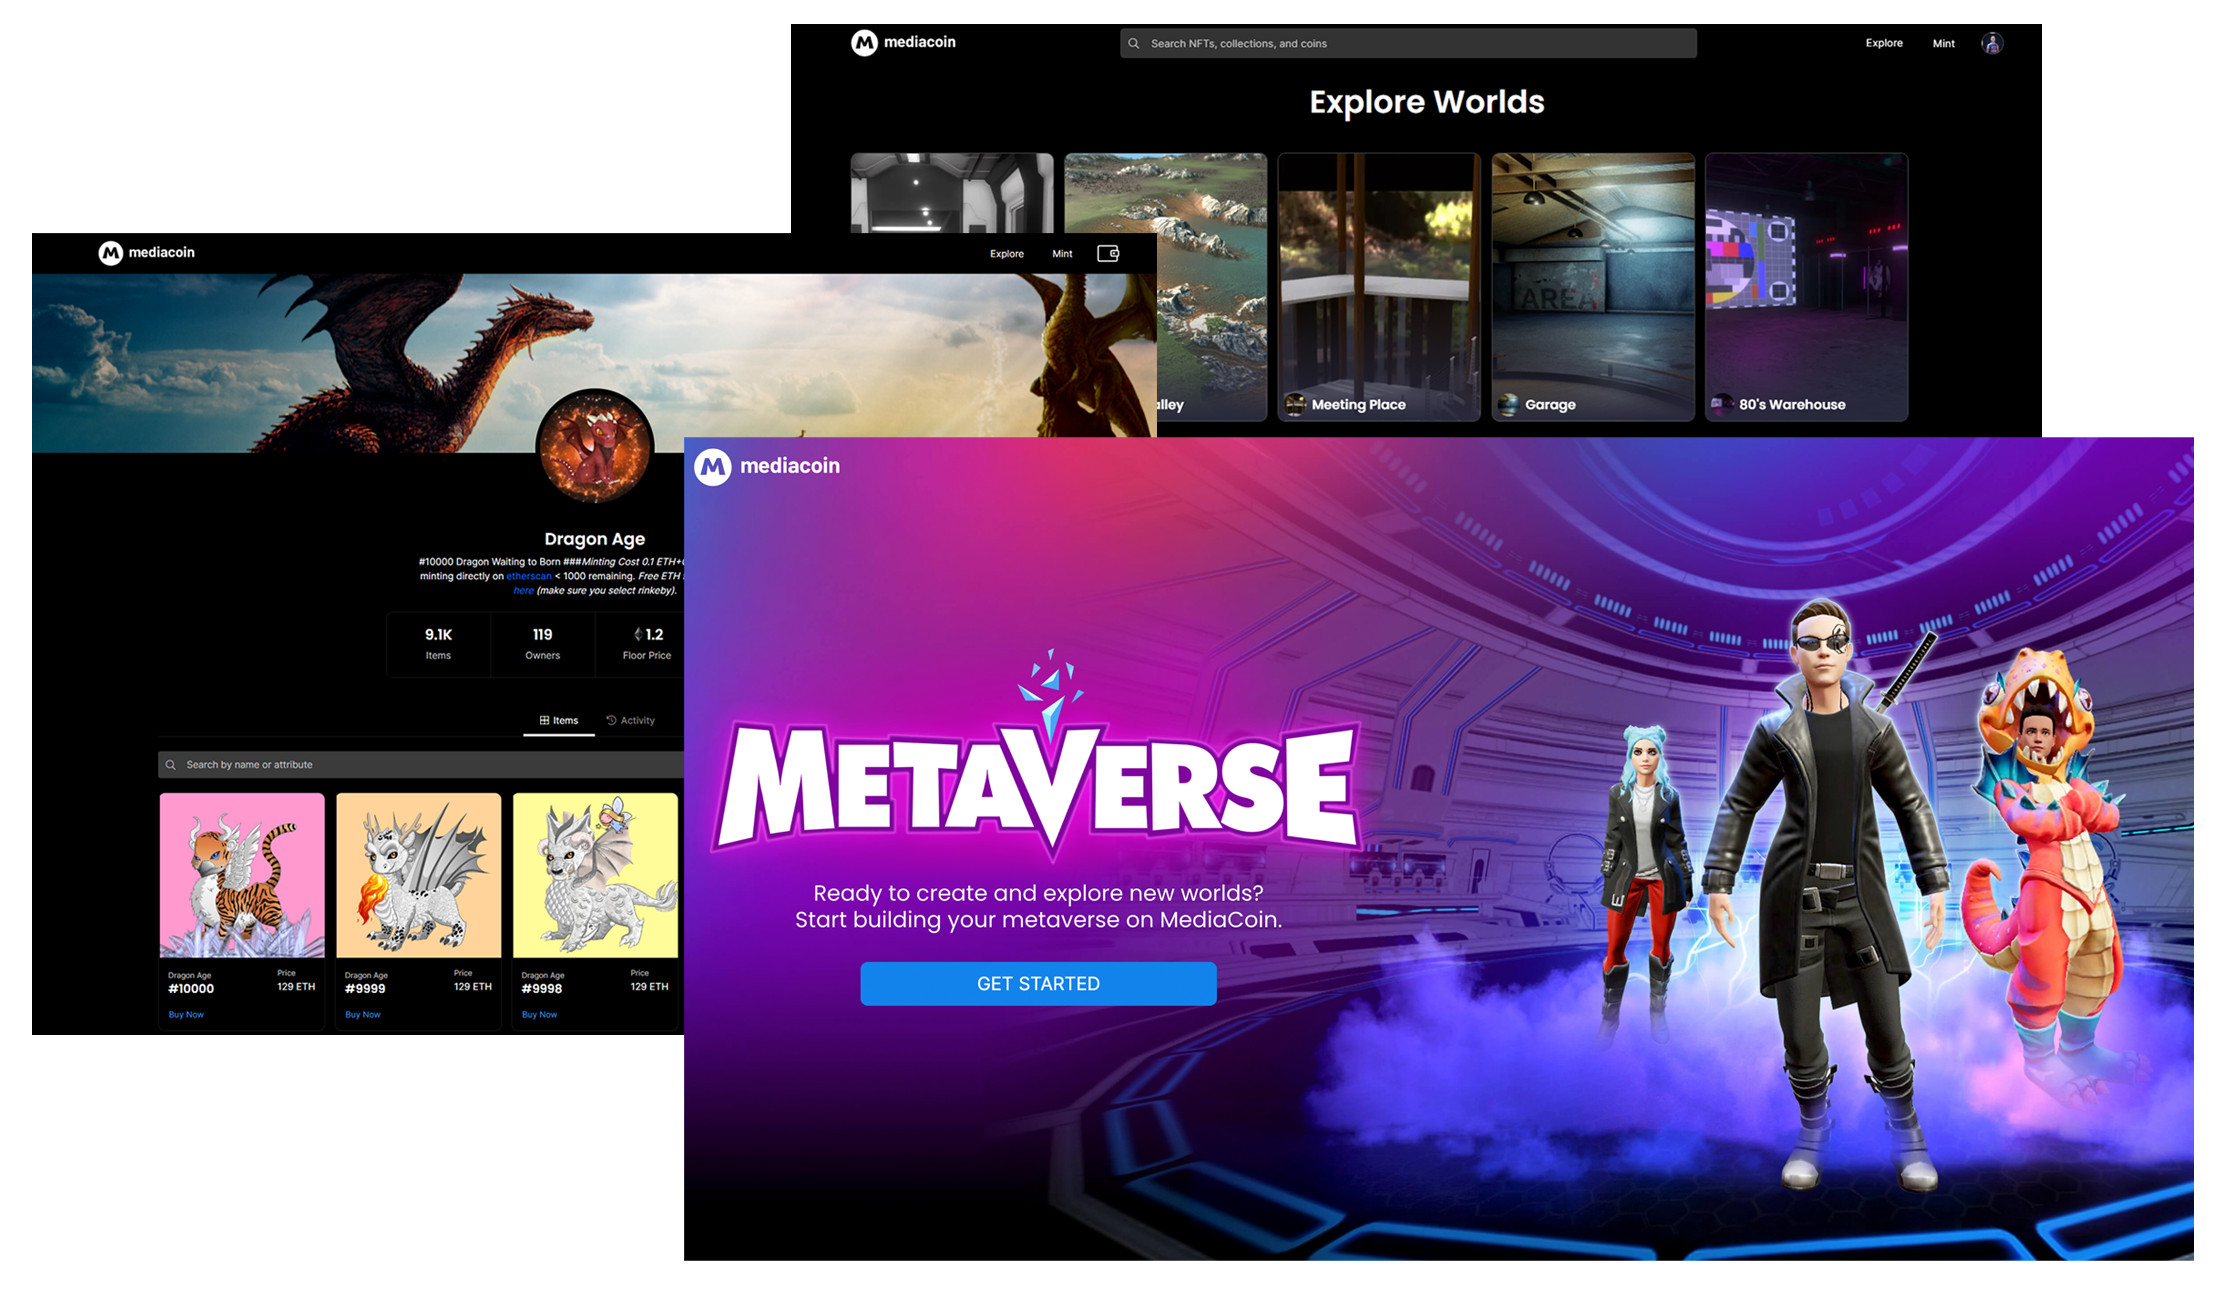 Image of MediaCoin screen for creating and managing collections, as well as an inset of three metaverse gaming characters: a cybersoldier woman with a laser rifle, a glam-space-age panda with a helmet and guitar, and a mad scientist.